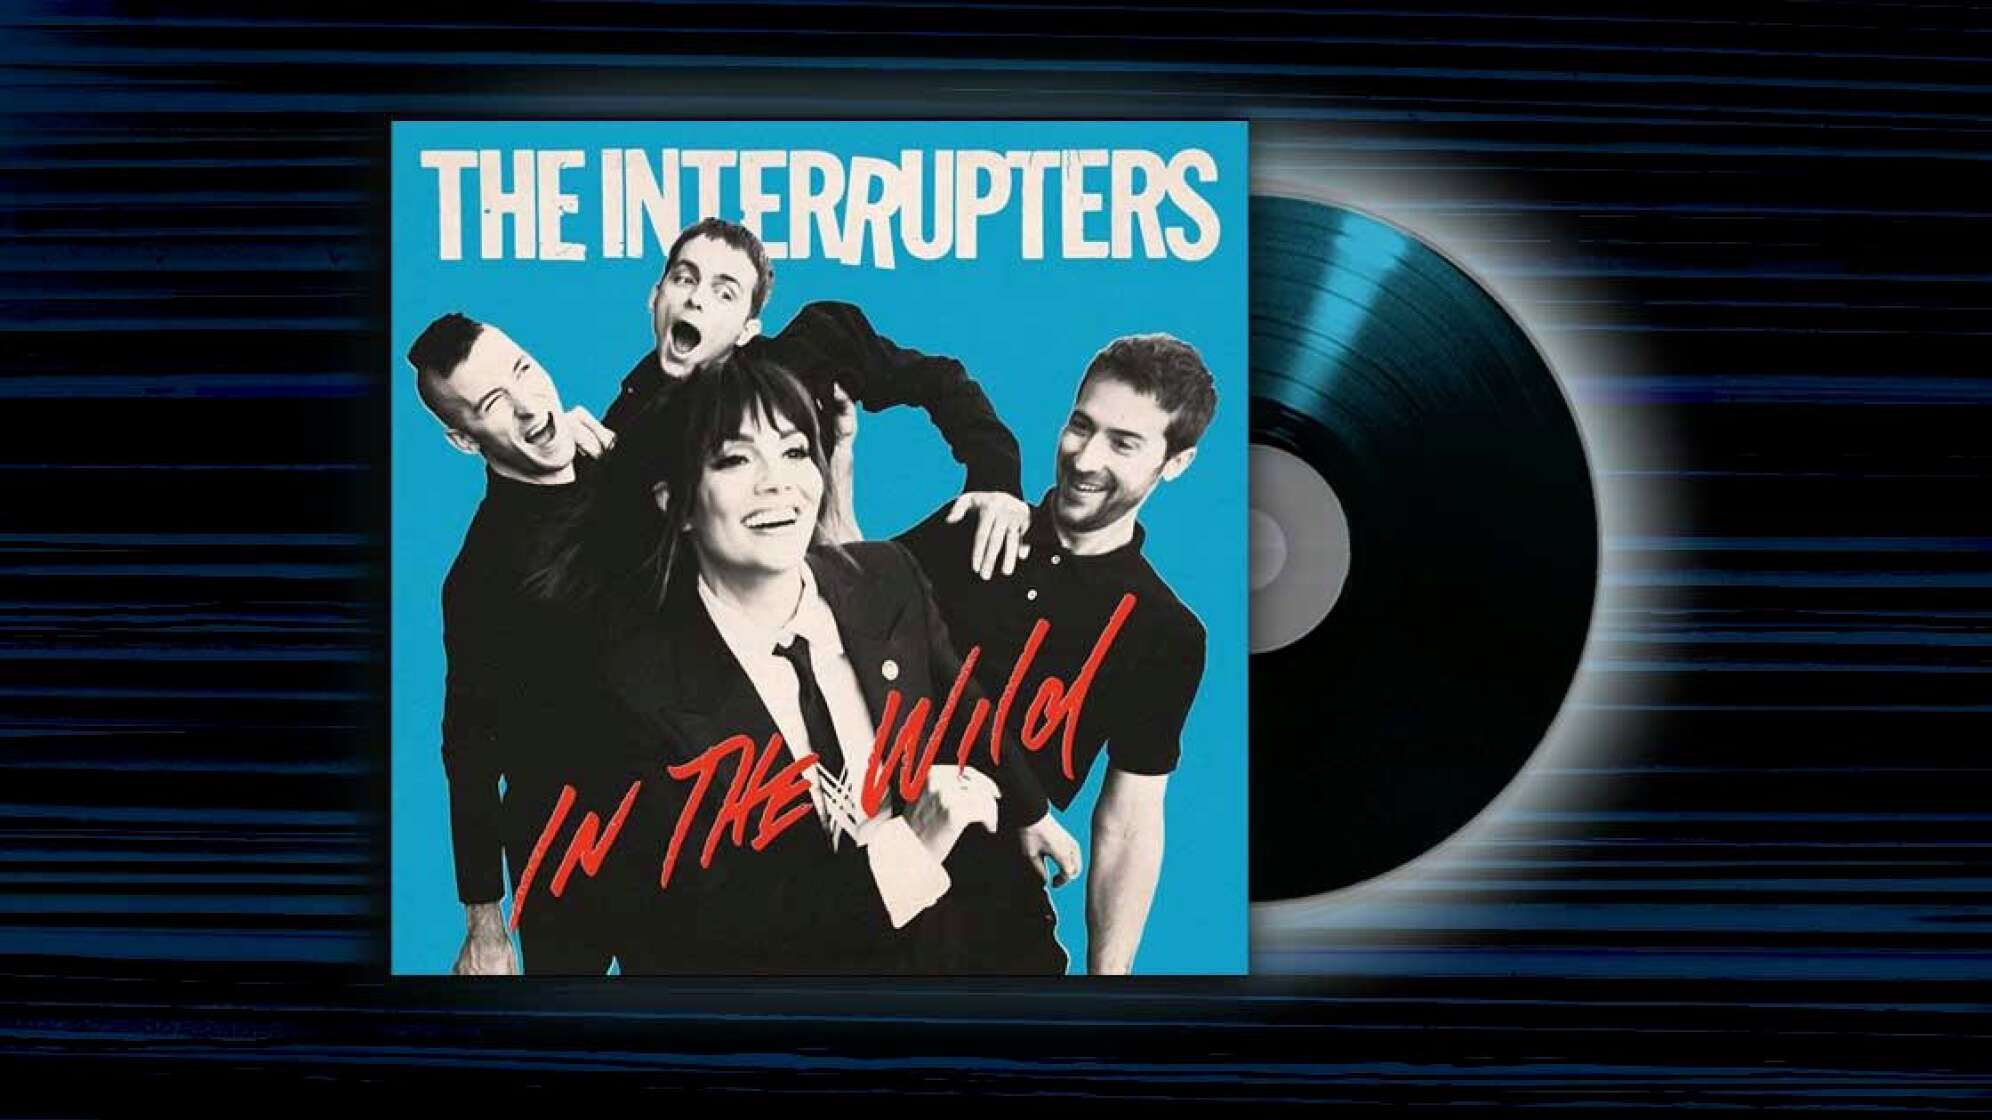 Album-Cover: The Interrupters - In the wild